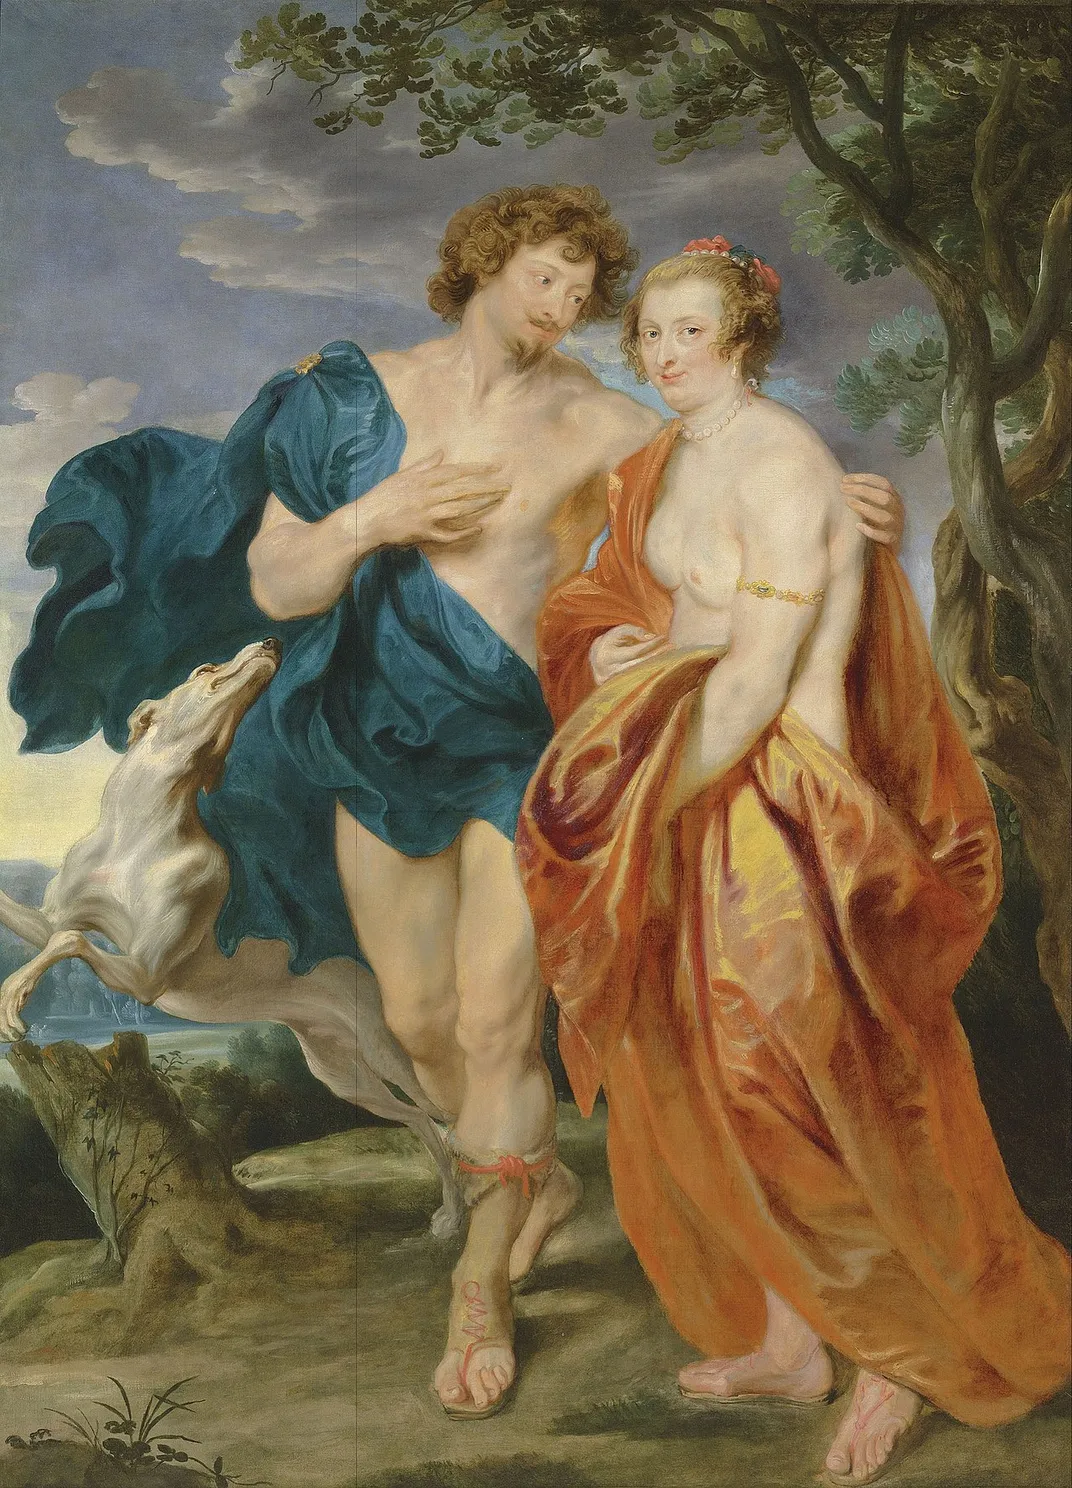 An Anthony van Dyck portrait of George and his wife, Katherine Manners, as Venus and Adonis